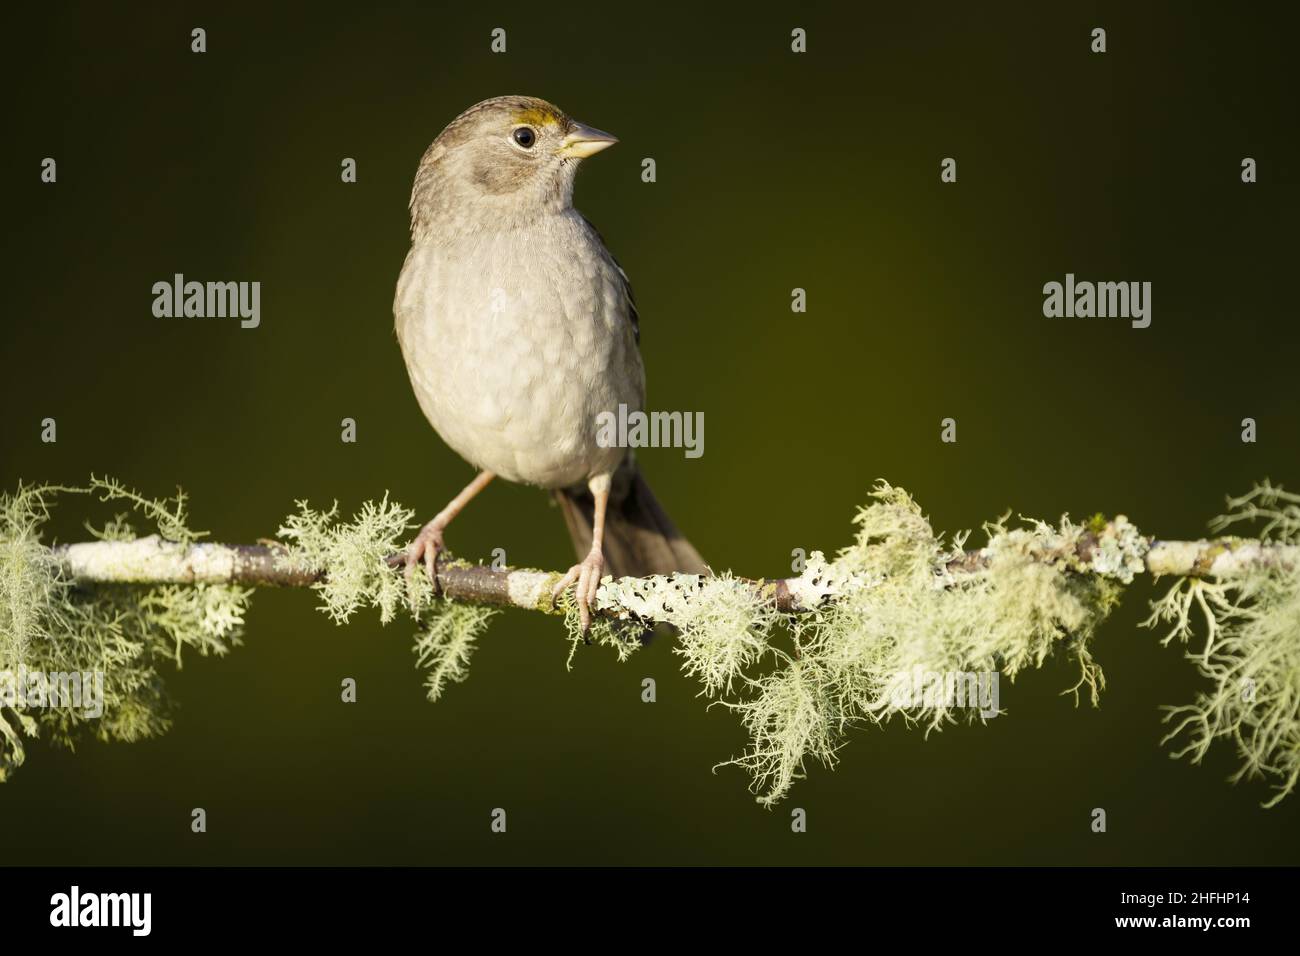 Golden-crowned sparrow in winter plumage perched on lichen covered branch, Snohomish, Washington, USA Stock Photo